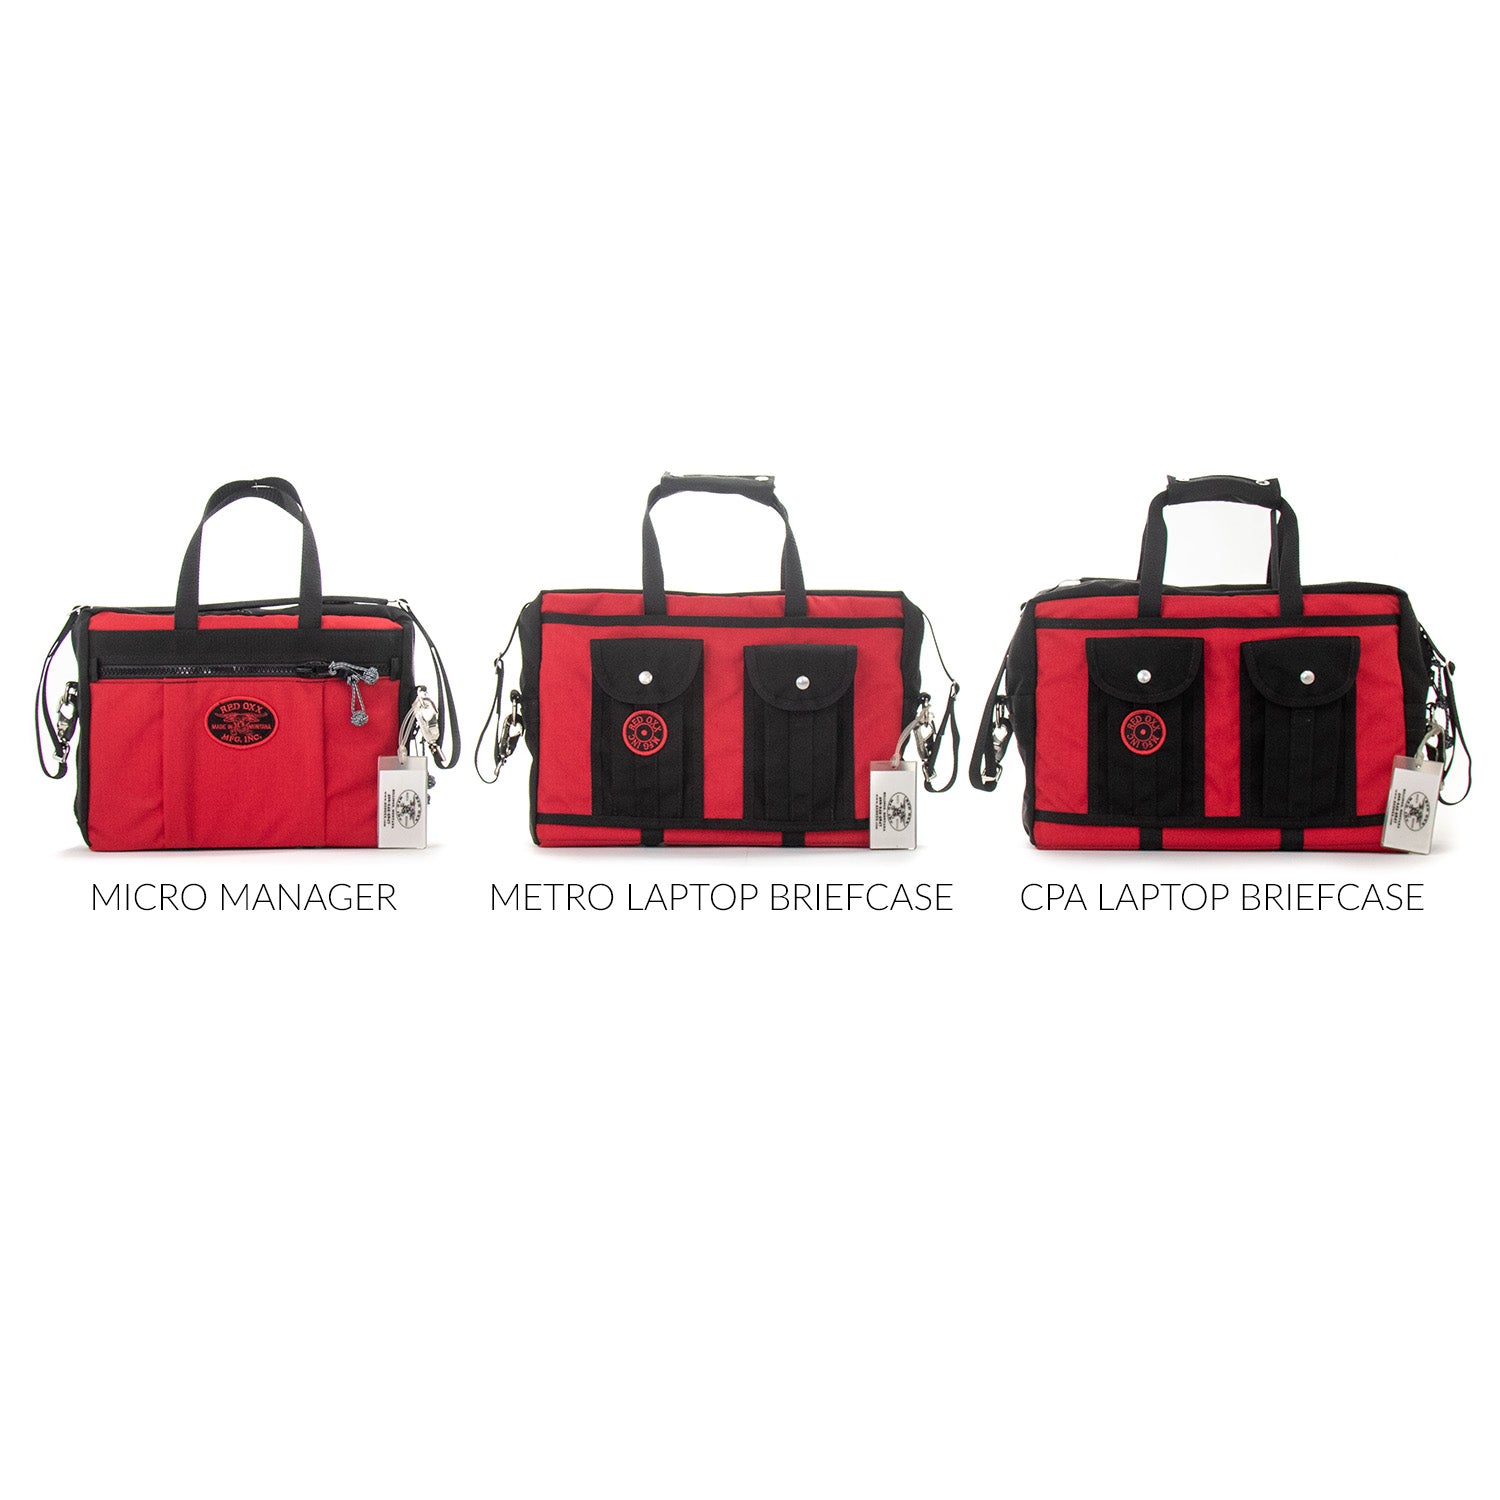 Size comparison from left to right Micro Manager - Metro Laptop - CPA Laptop Briefcase